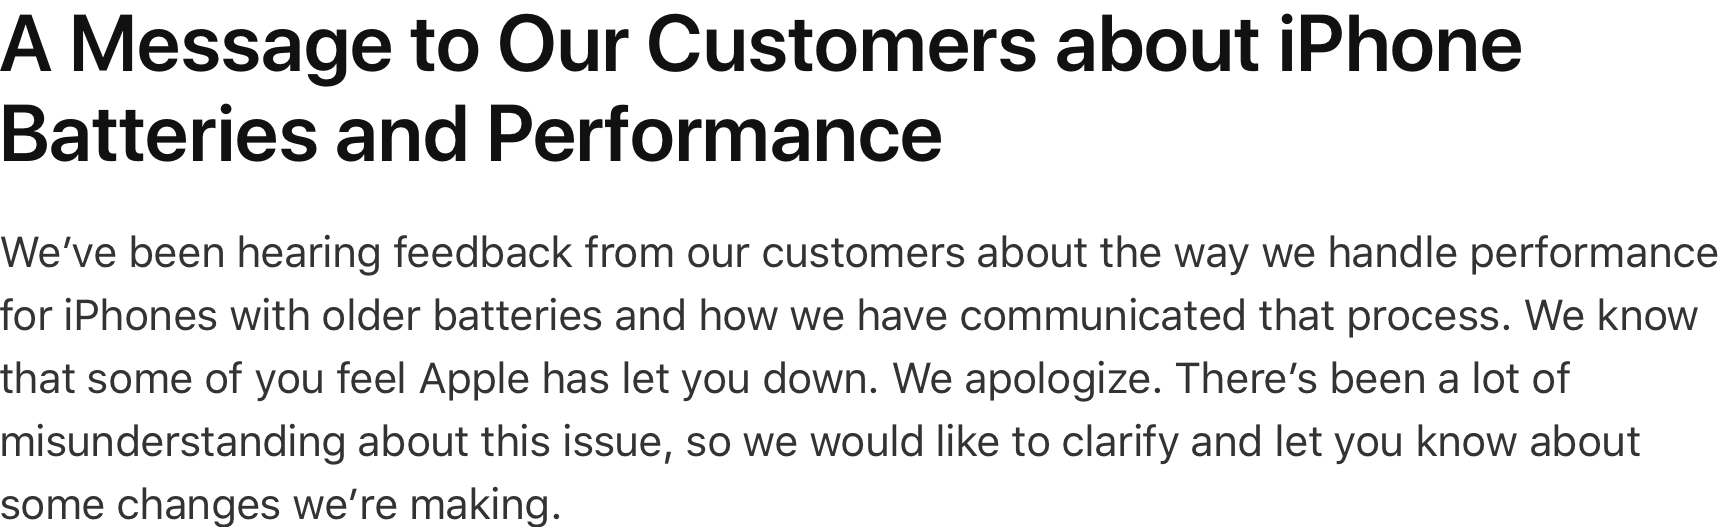 apple message to customers